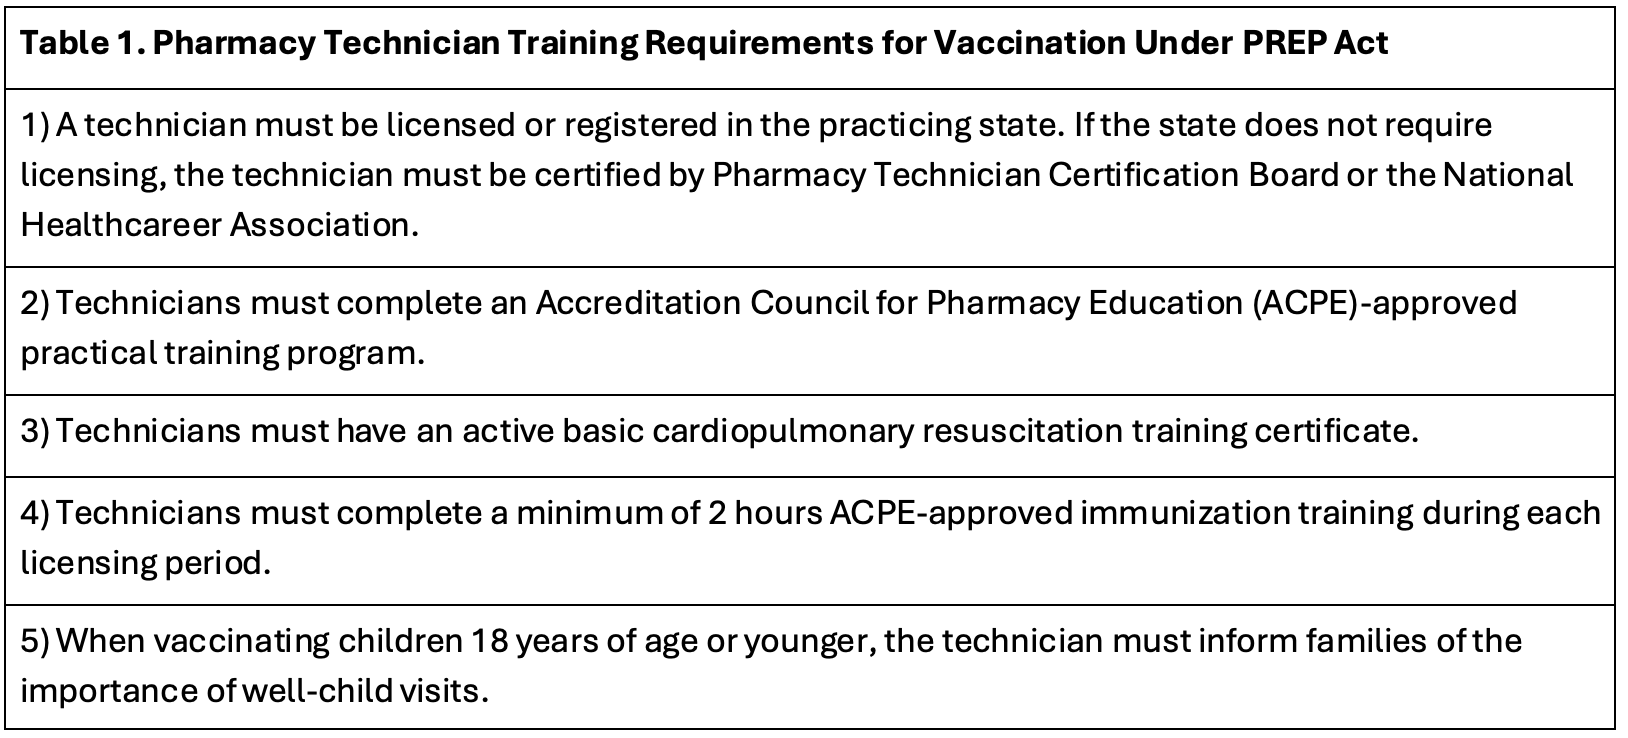 Table 1. Pharmacy Technician Training Requirements for Vaccination Under the PREP Act